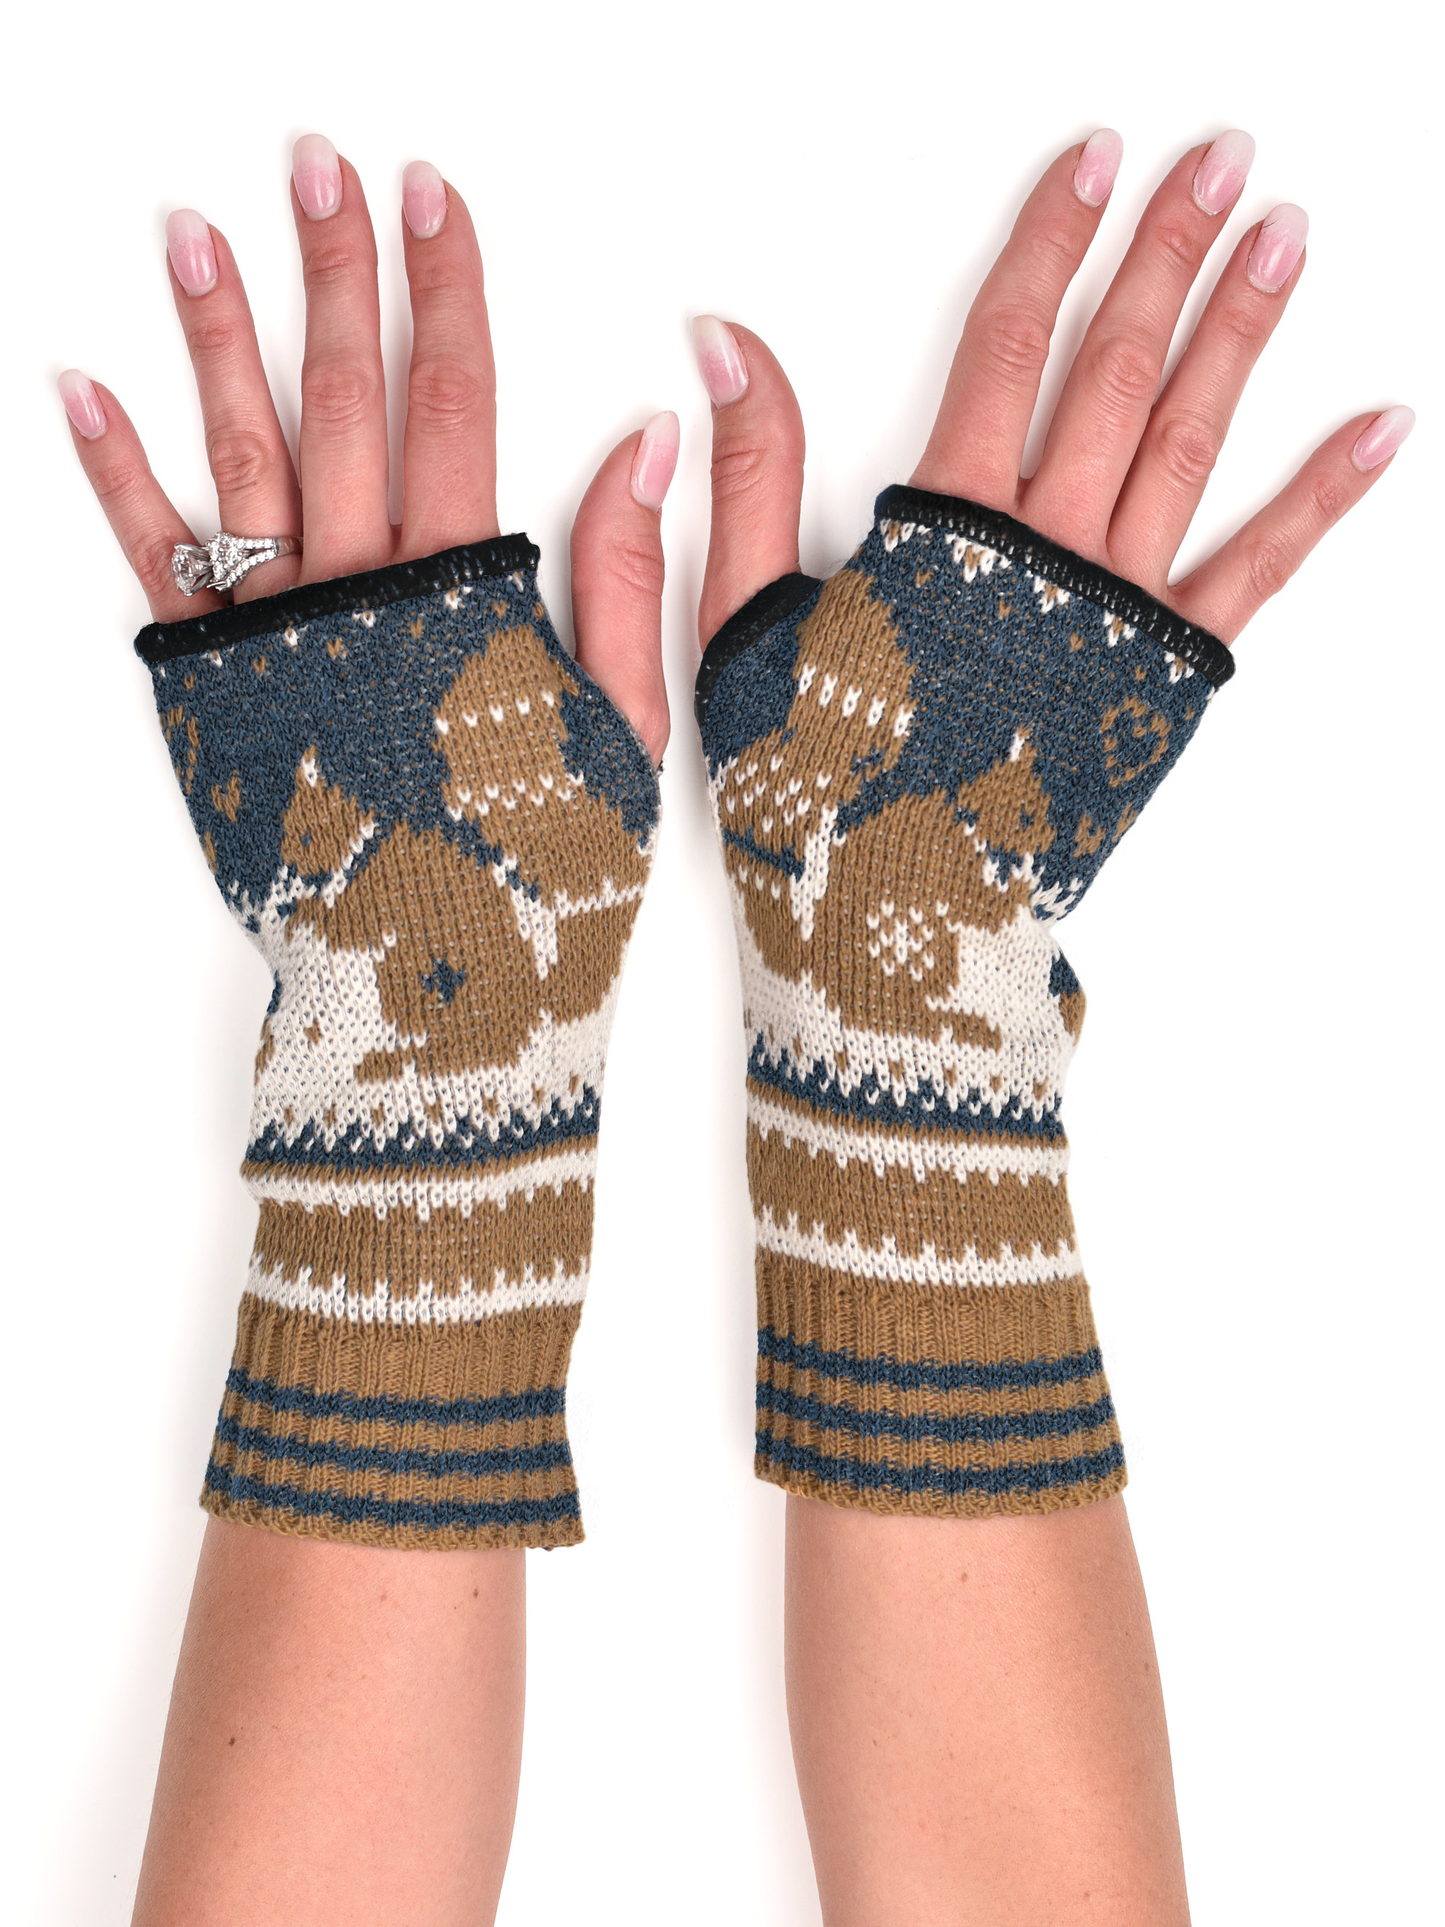 Recycled Cotton Handwarmers Fingerless Gloves - Squirrels